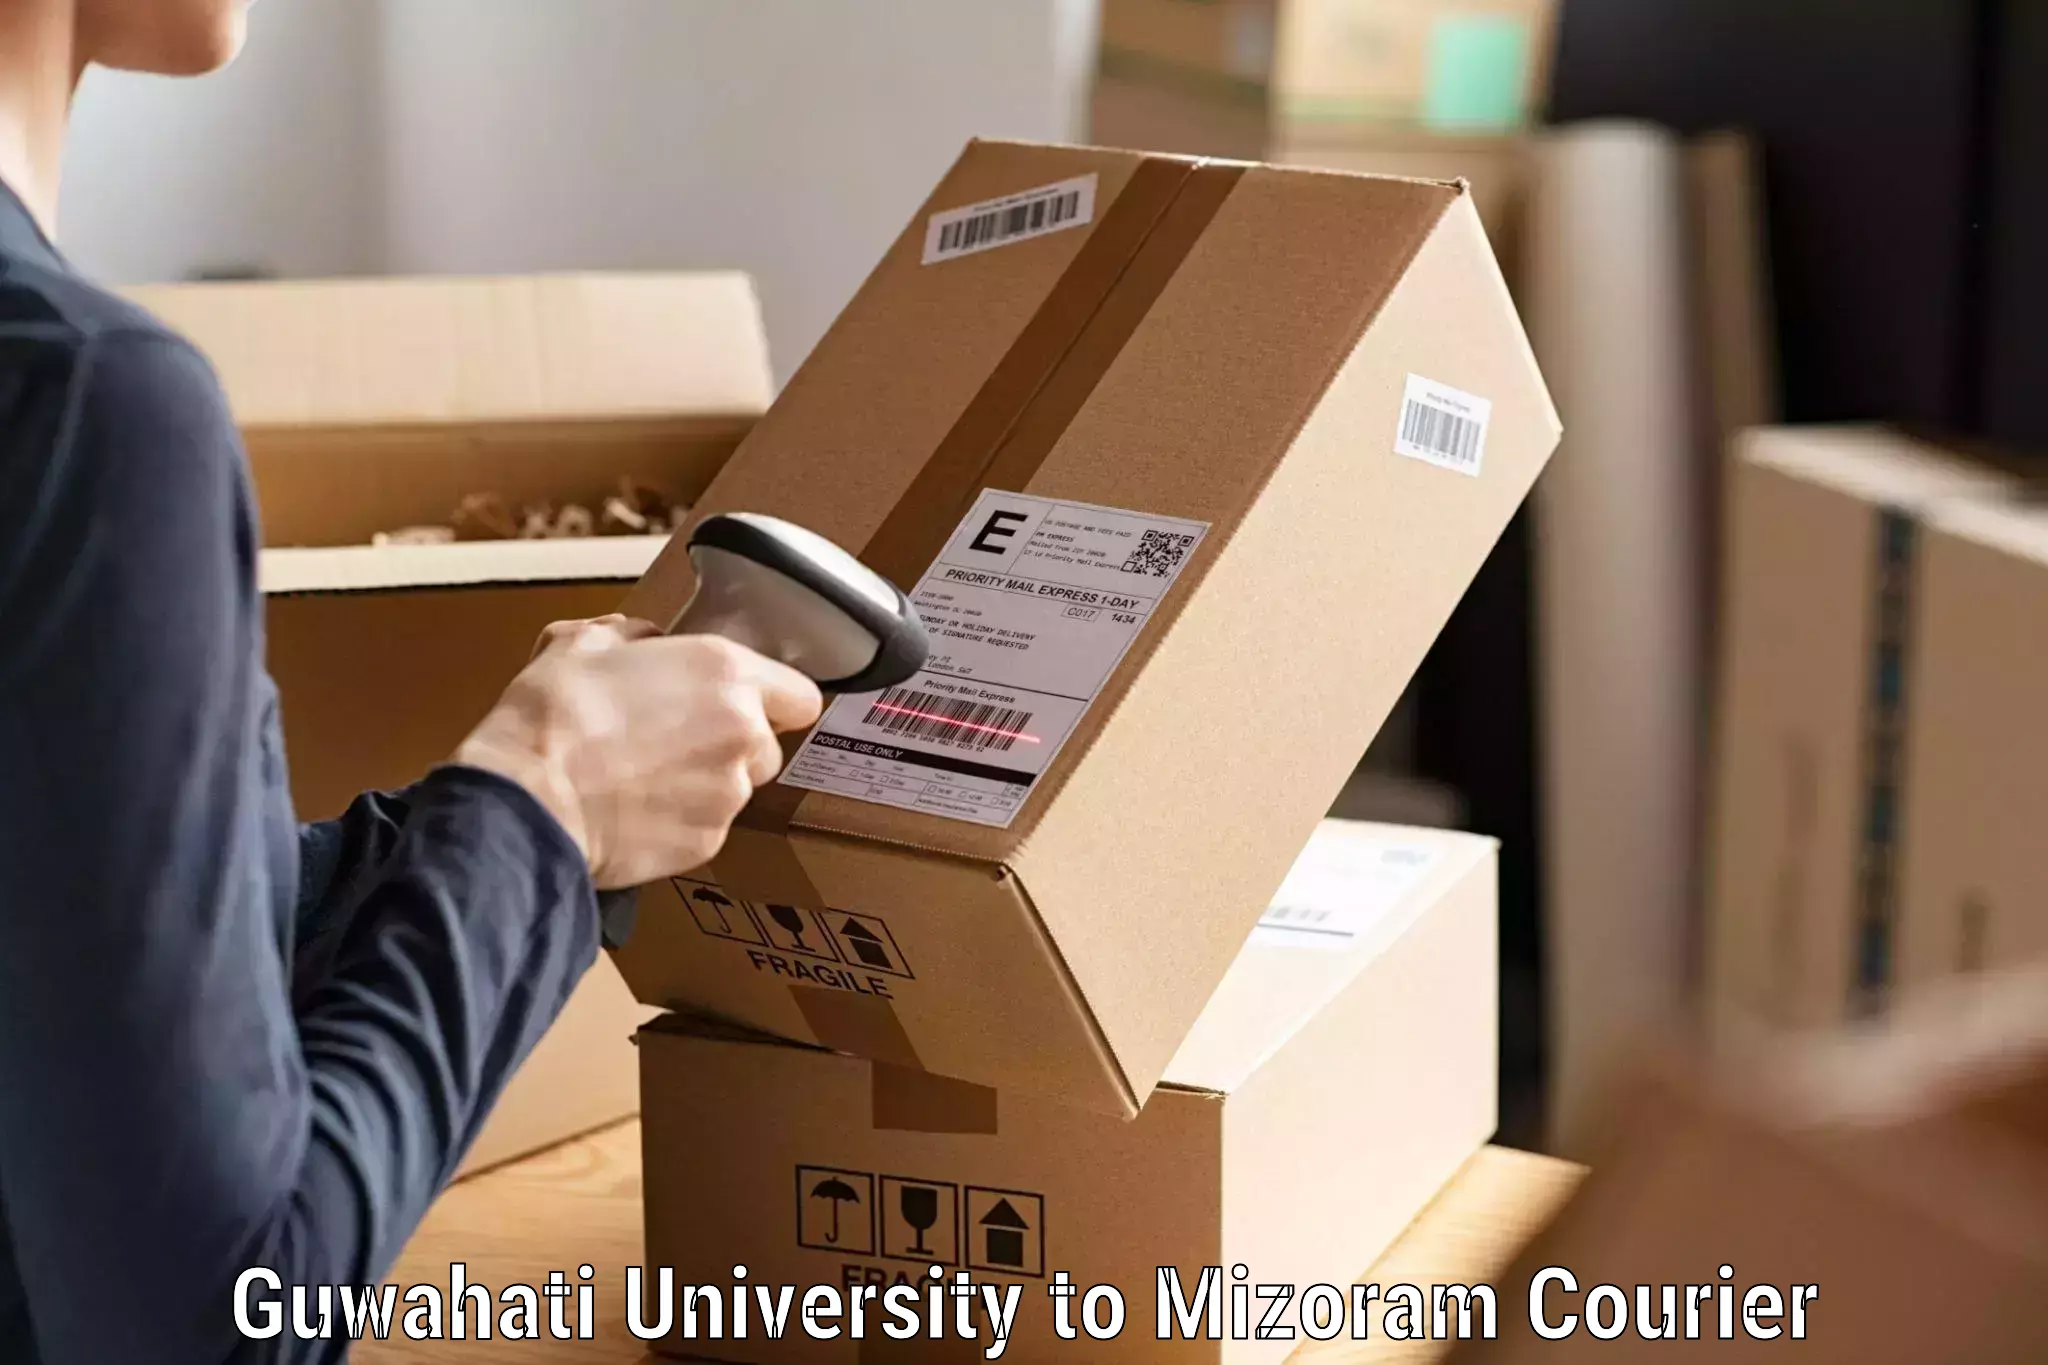 Quality courier services Guwahati University to Tlabung